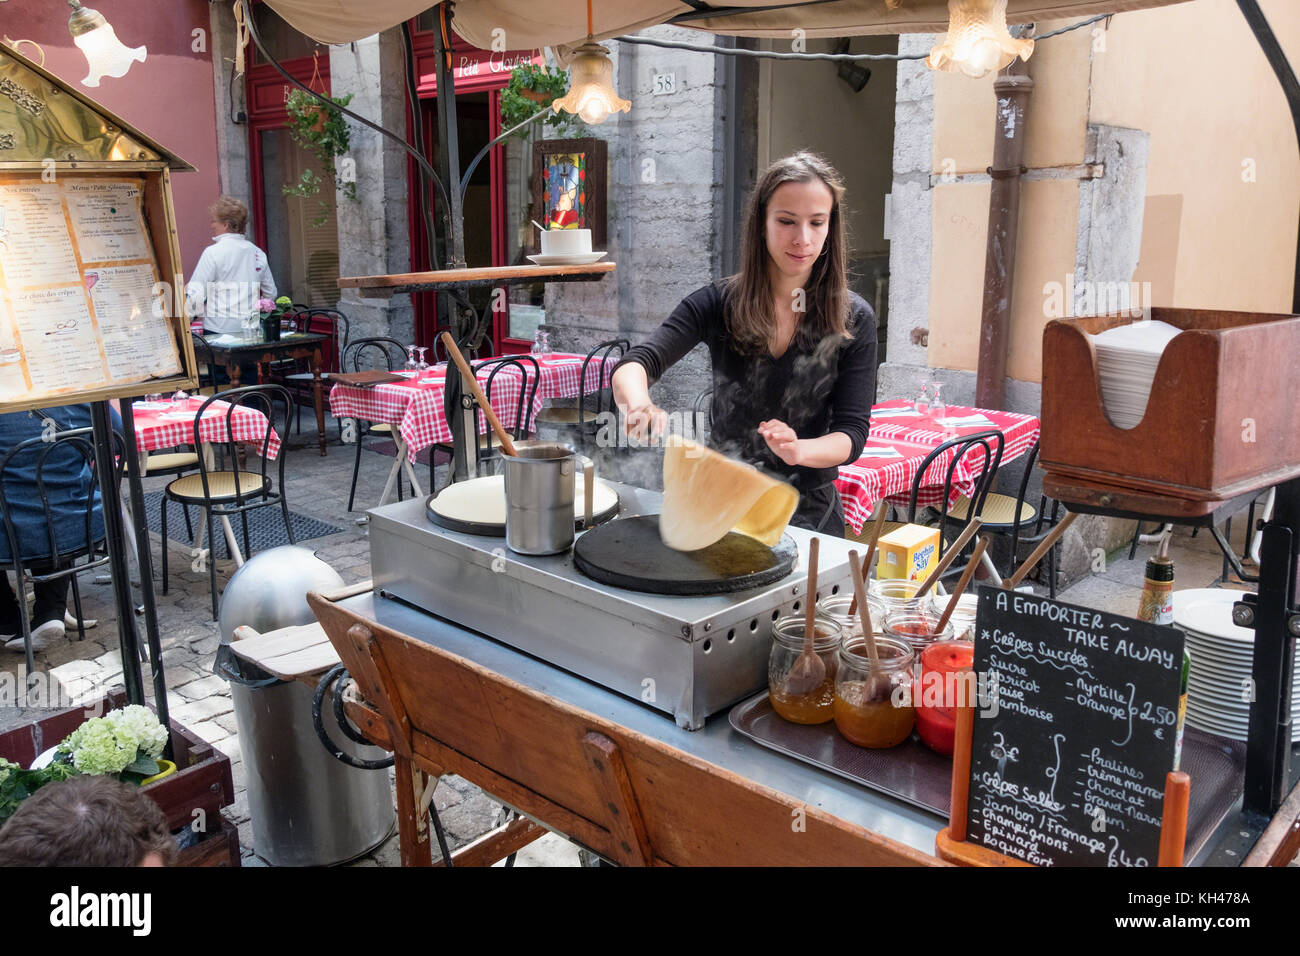 Young Woman is Preparing Crepes outdoors, Old Lyon, France Stock Photo